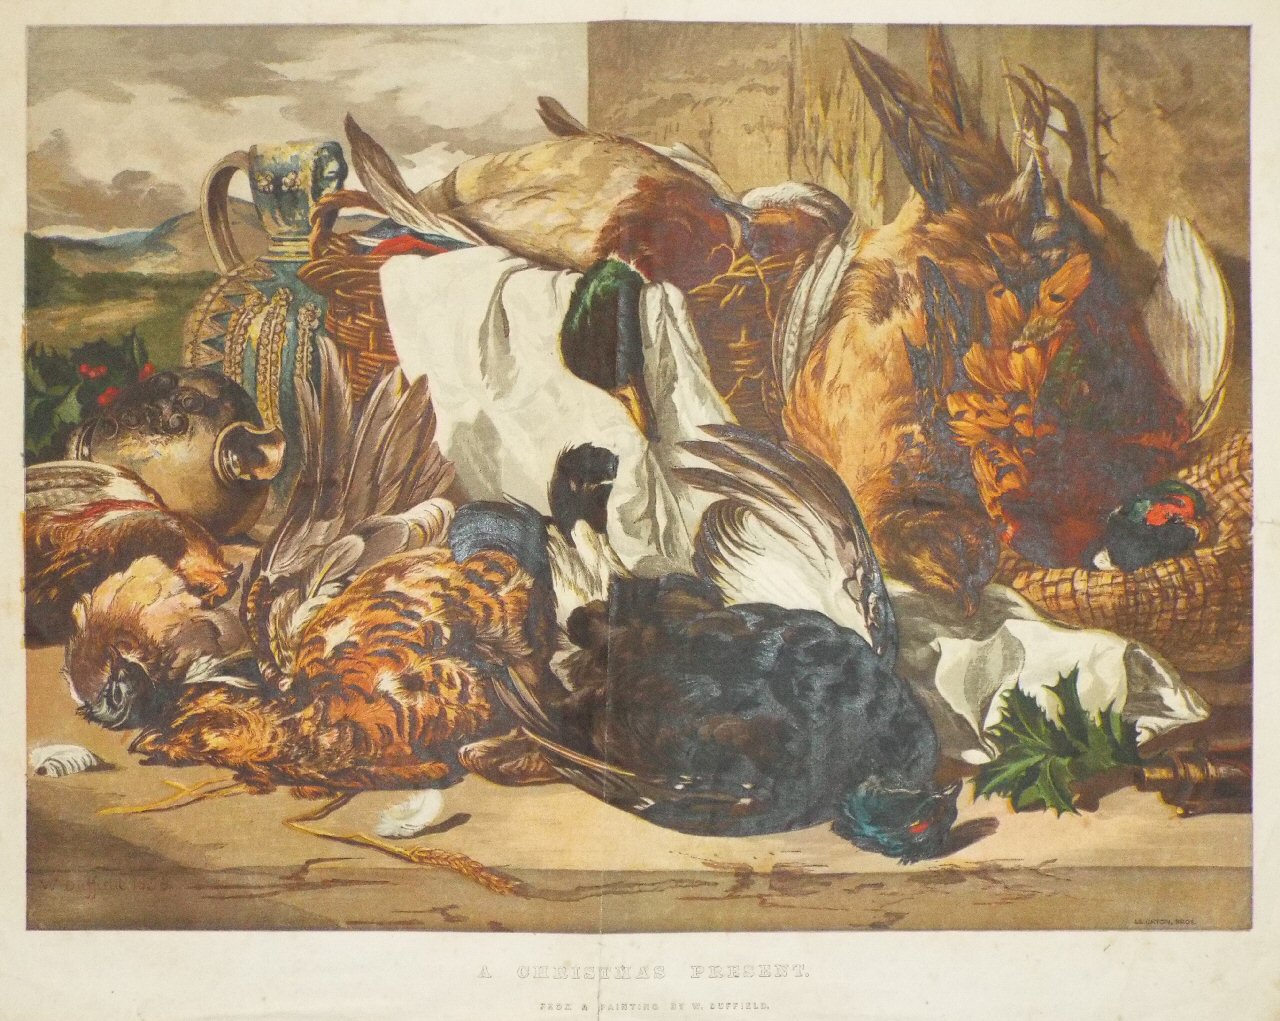 Chromo-lithograph - A Christmas Present. From a Painting by W. Duffield.